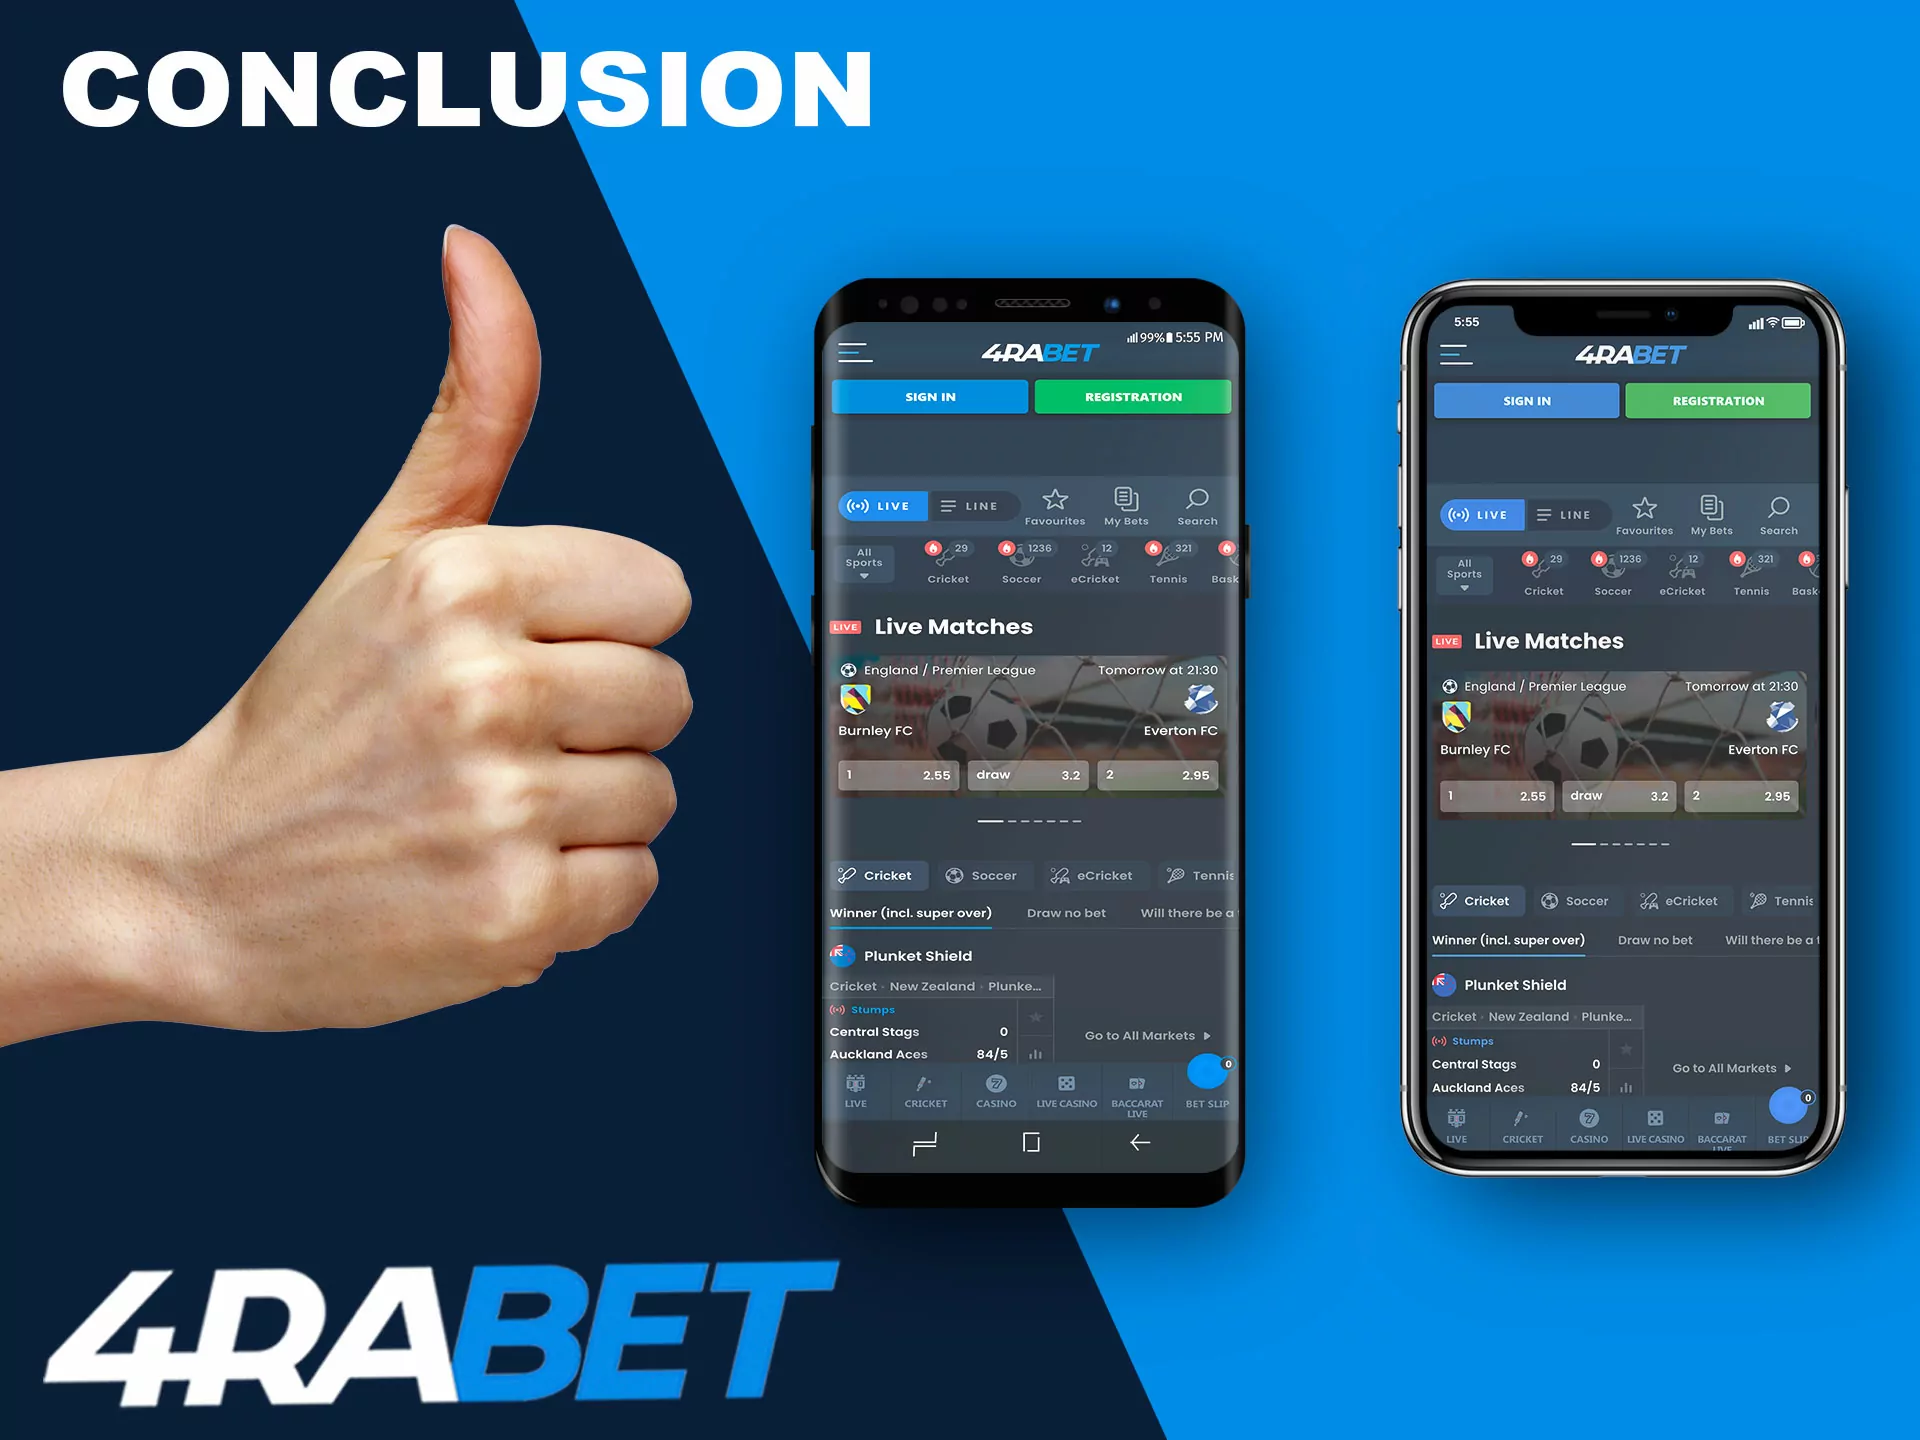 We hope that you have learned a lot of new and useful information about 4rabet betting app.